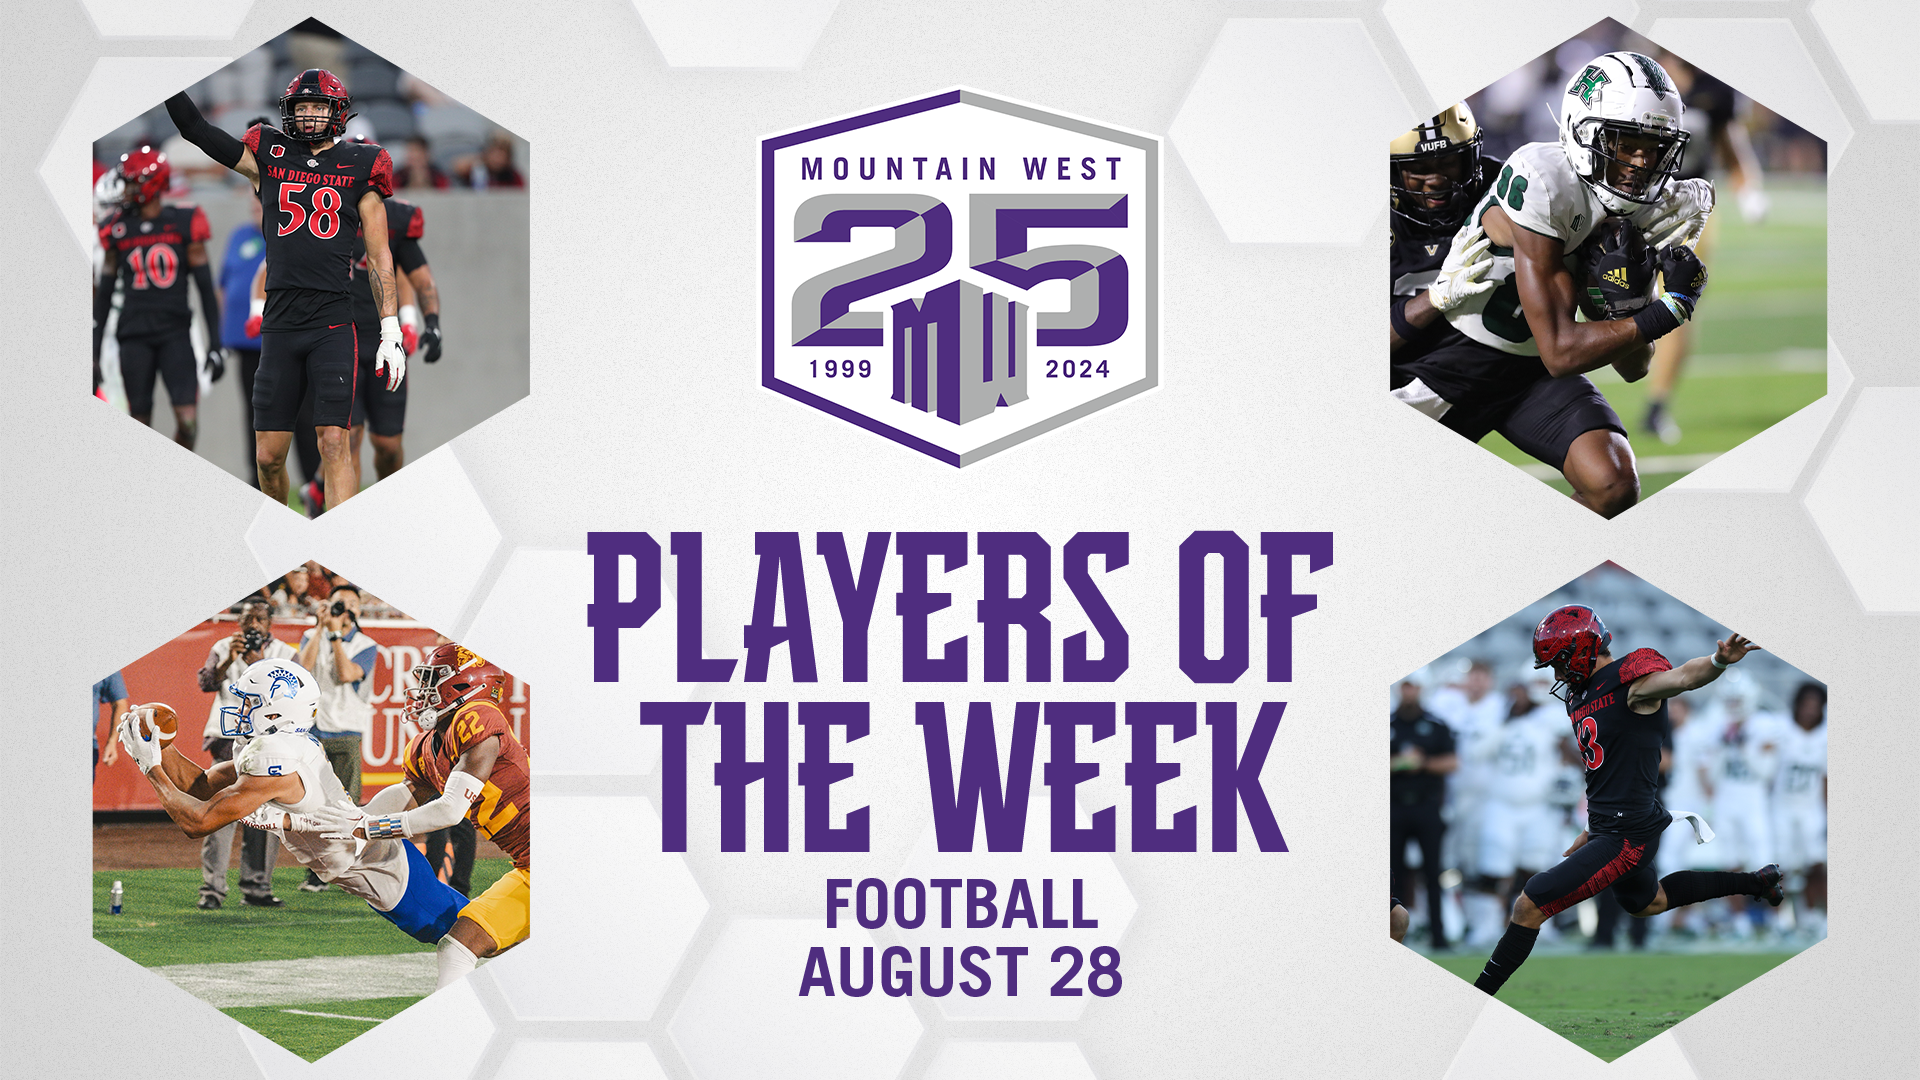 MW Football Players of the Week - August 28